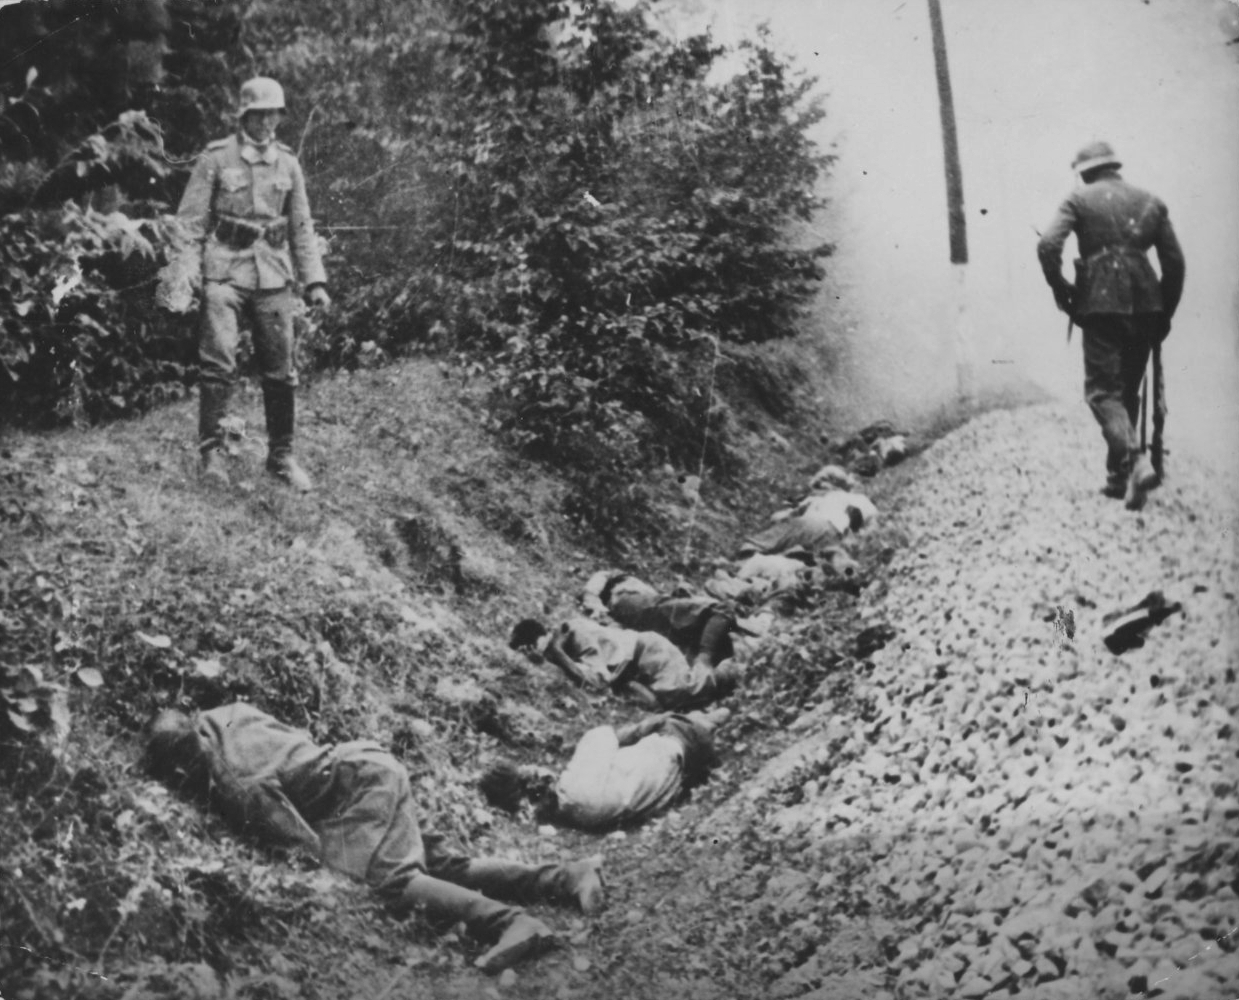 Two German soldiers near the ditch with bodies of executed Poles, Sept.-Oct. 1939 (Image: nationaalarchief.nl)